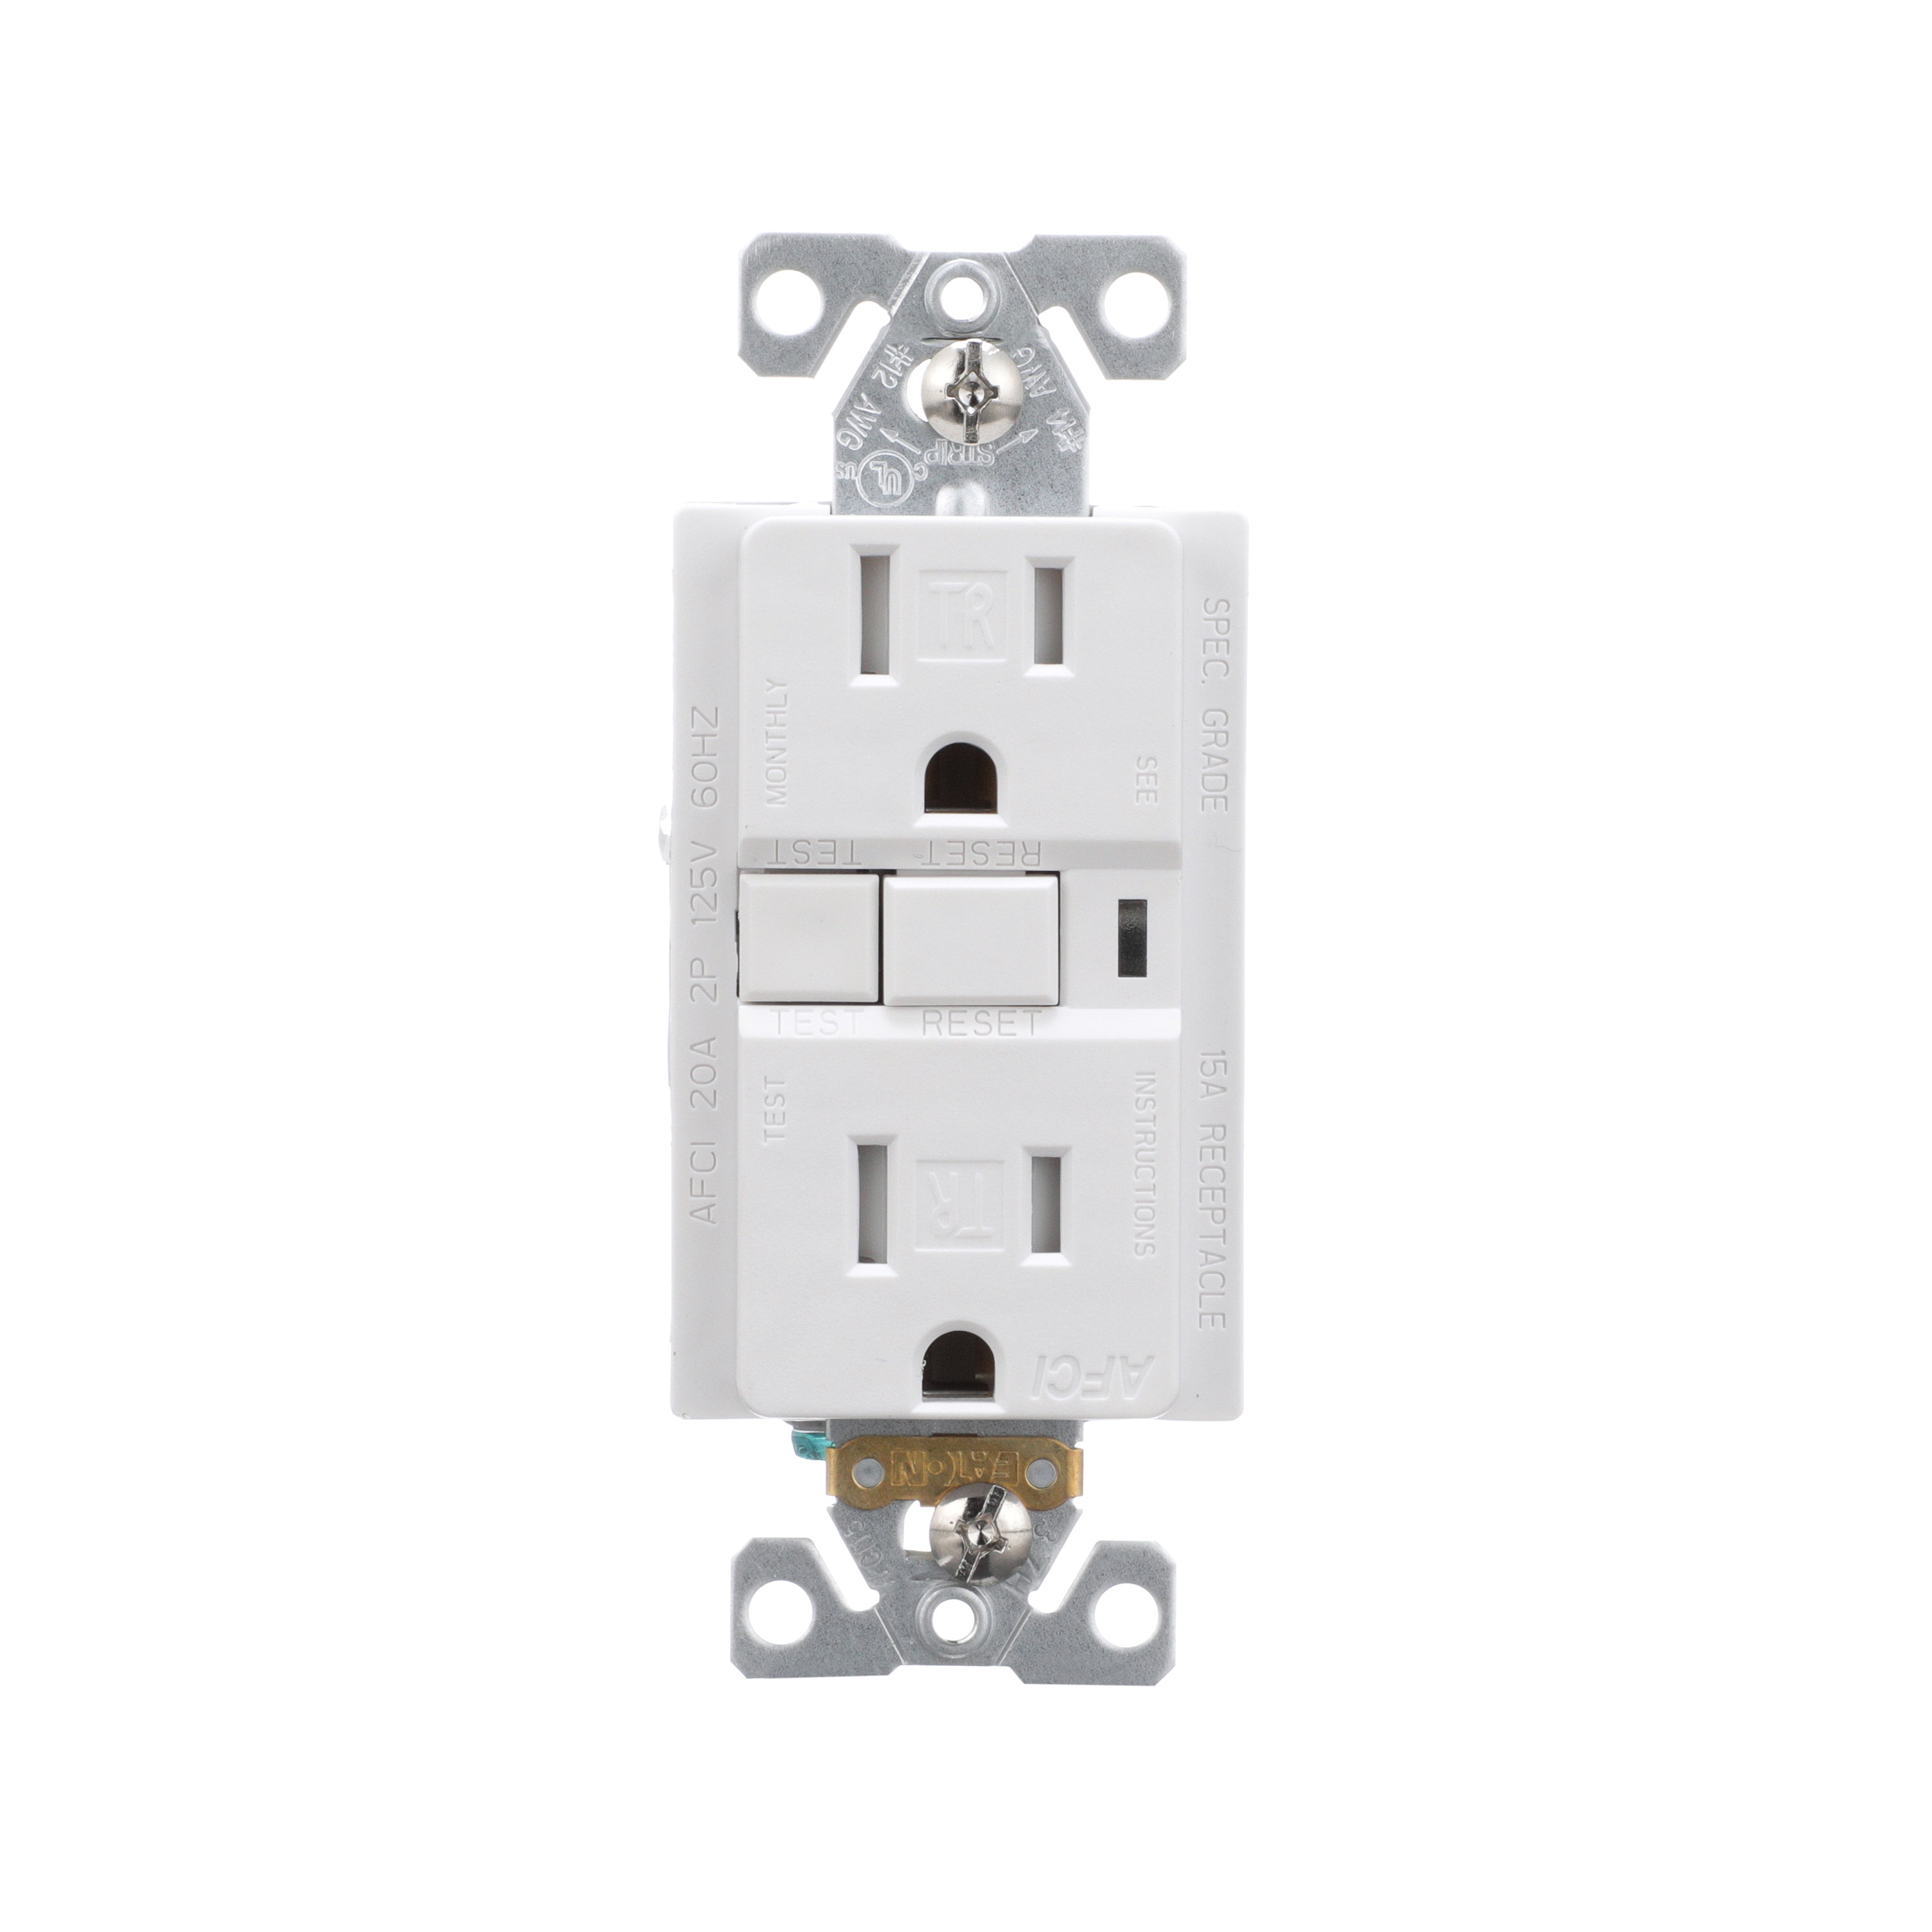 Electrical Outlet Repair & Installation Services: GFCI, AFCI, USB & More!